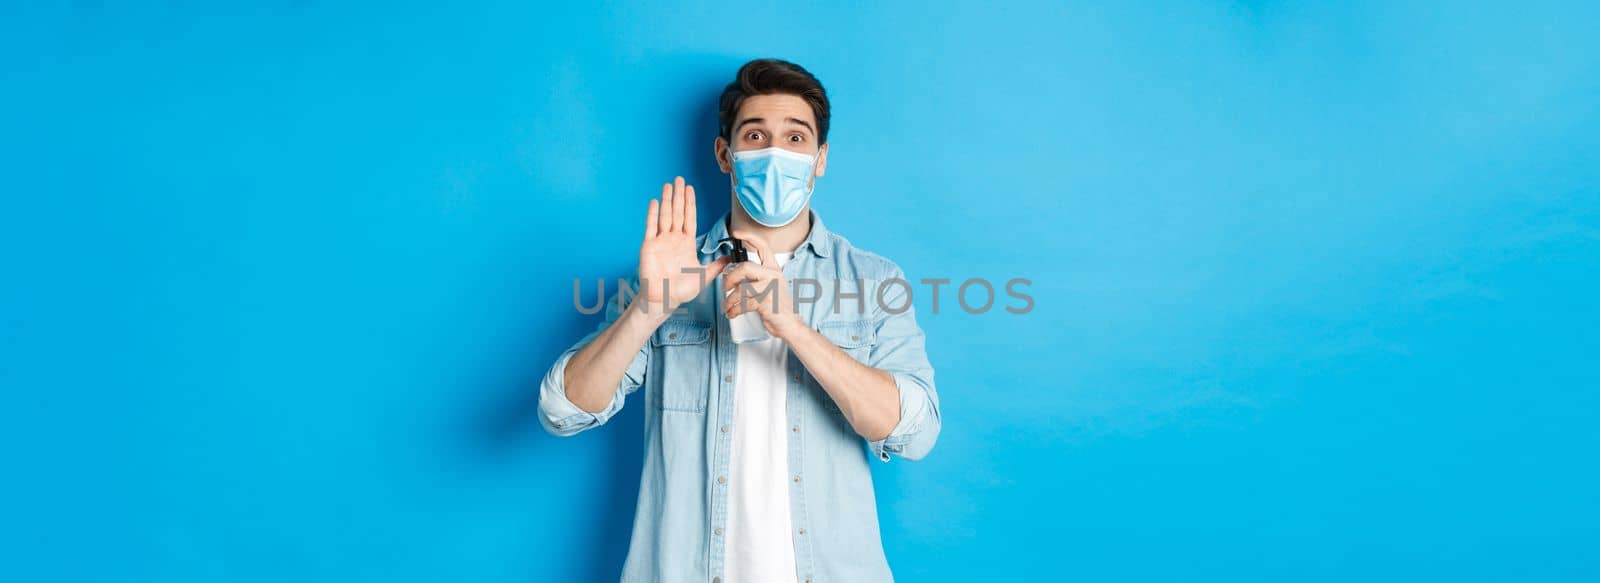 Concept of covid-19, pandemic and social distancing. Cheerful guy in medical mask showing how to disinfect hands with sanitizer, using antiseptic, preventing virus spread, blue background.